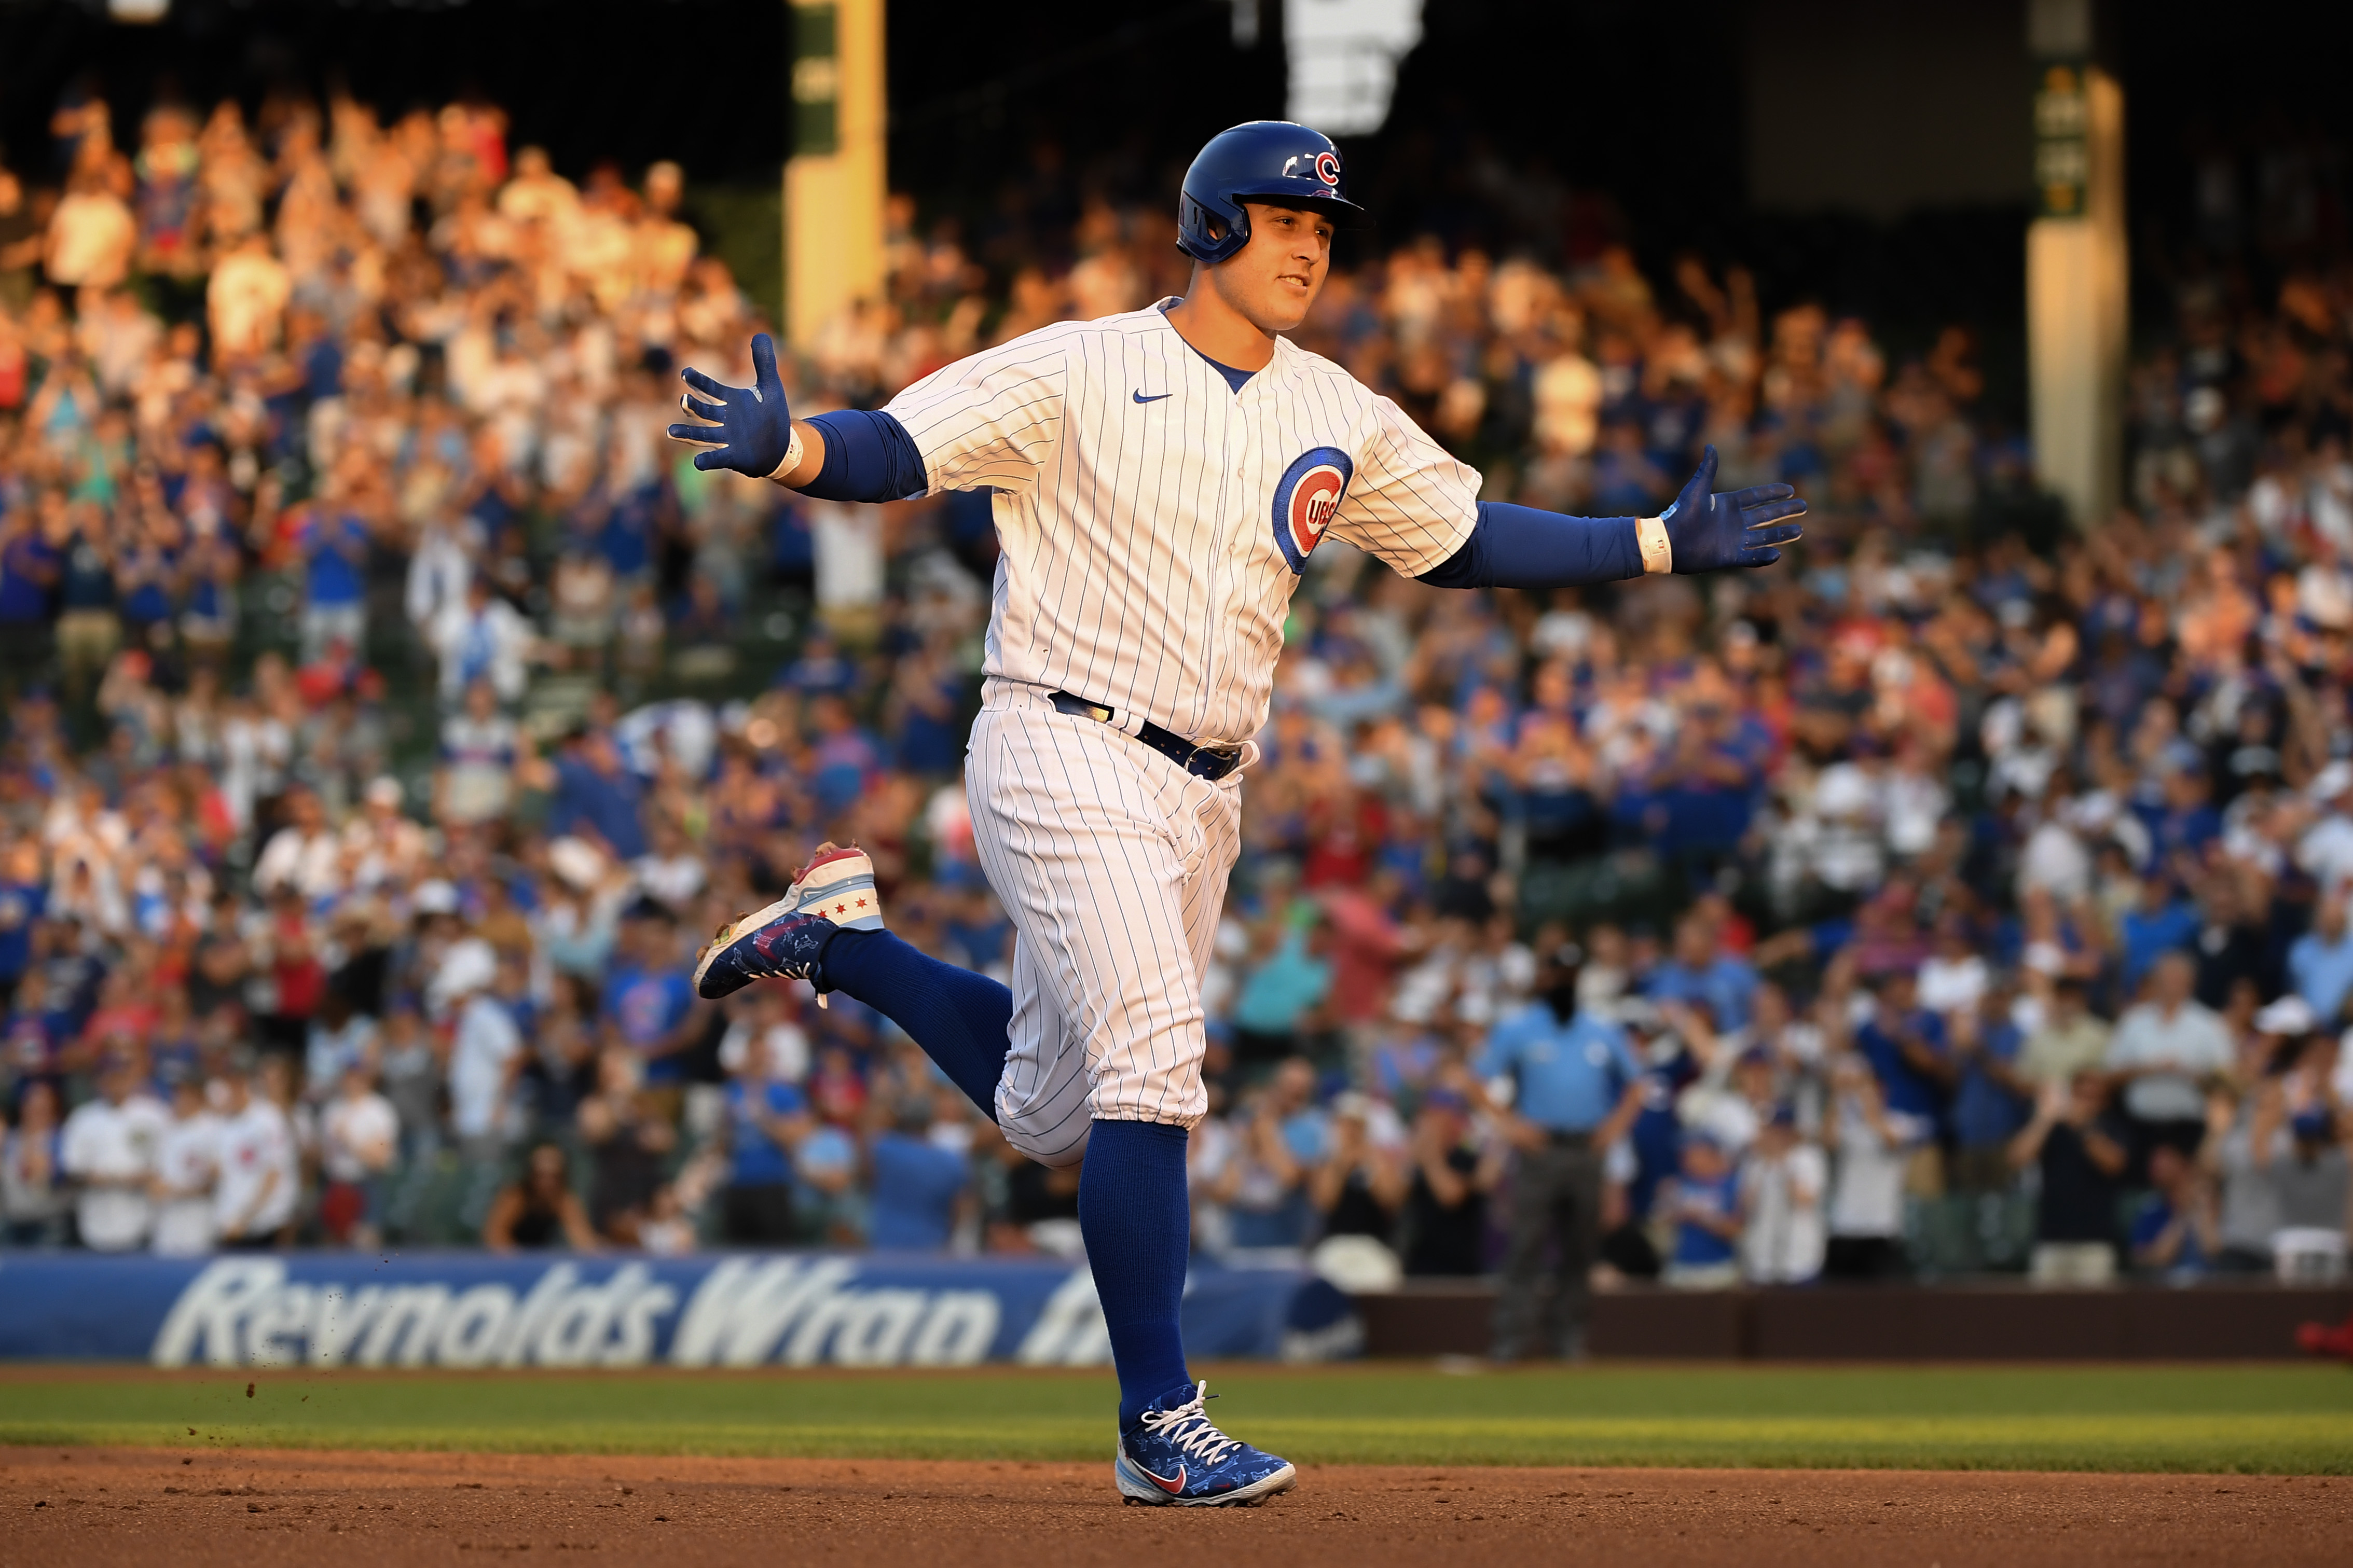 Boston Red Sox Trade Rumors: Is Anthony Rizzo the answer at first